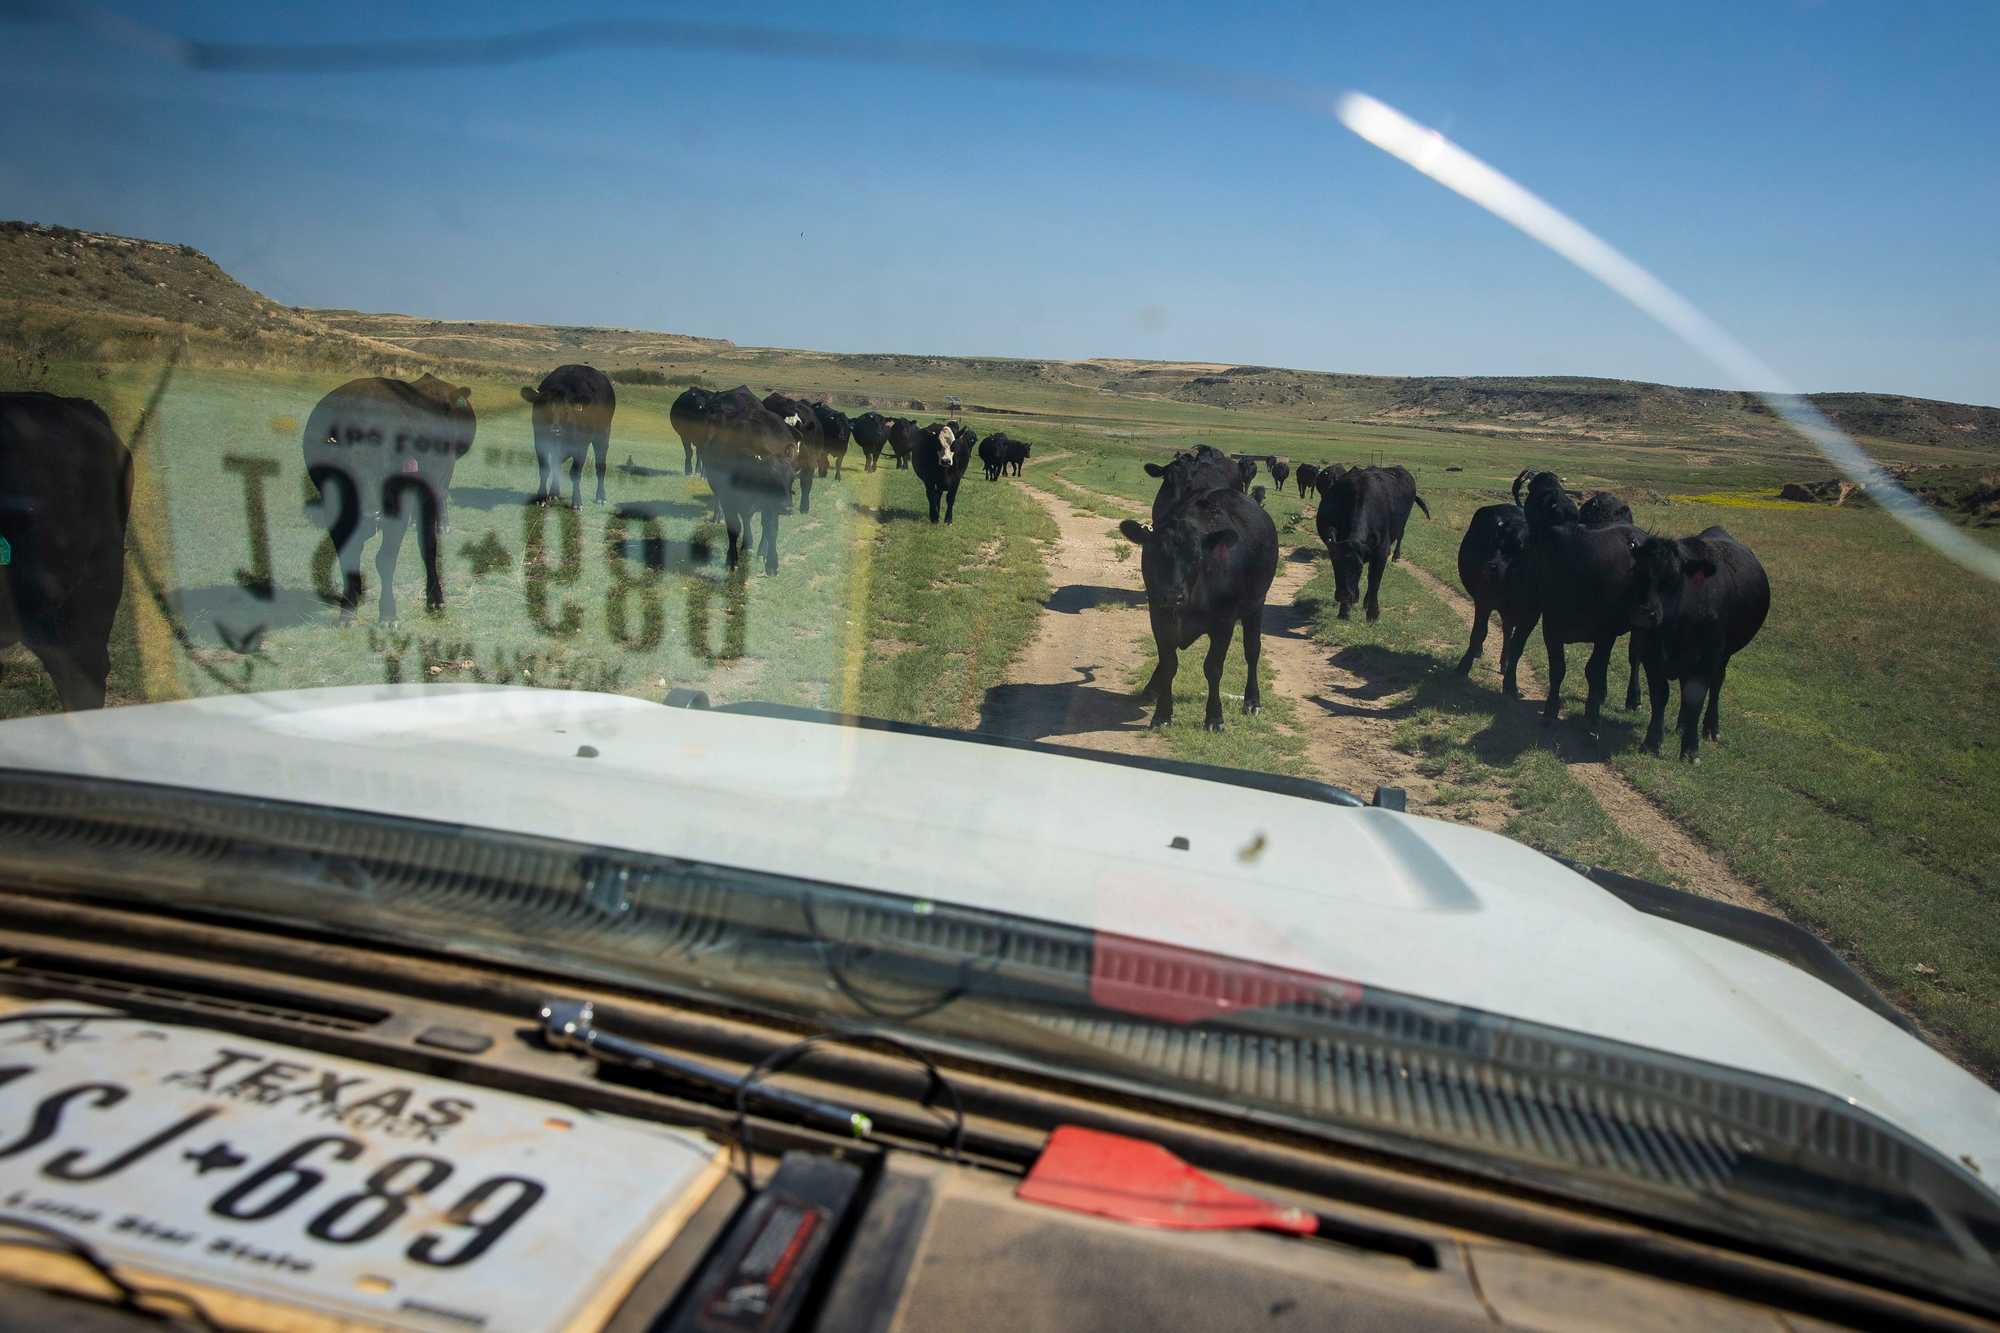 David Locke drove through his ranch distributing feed to his cattle. Drought conditions have ravaged the vegetation the cattle normally eat.
